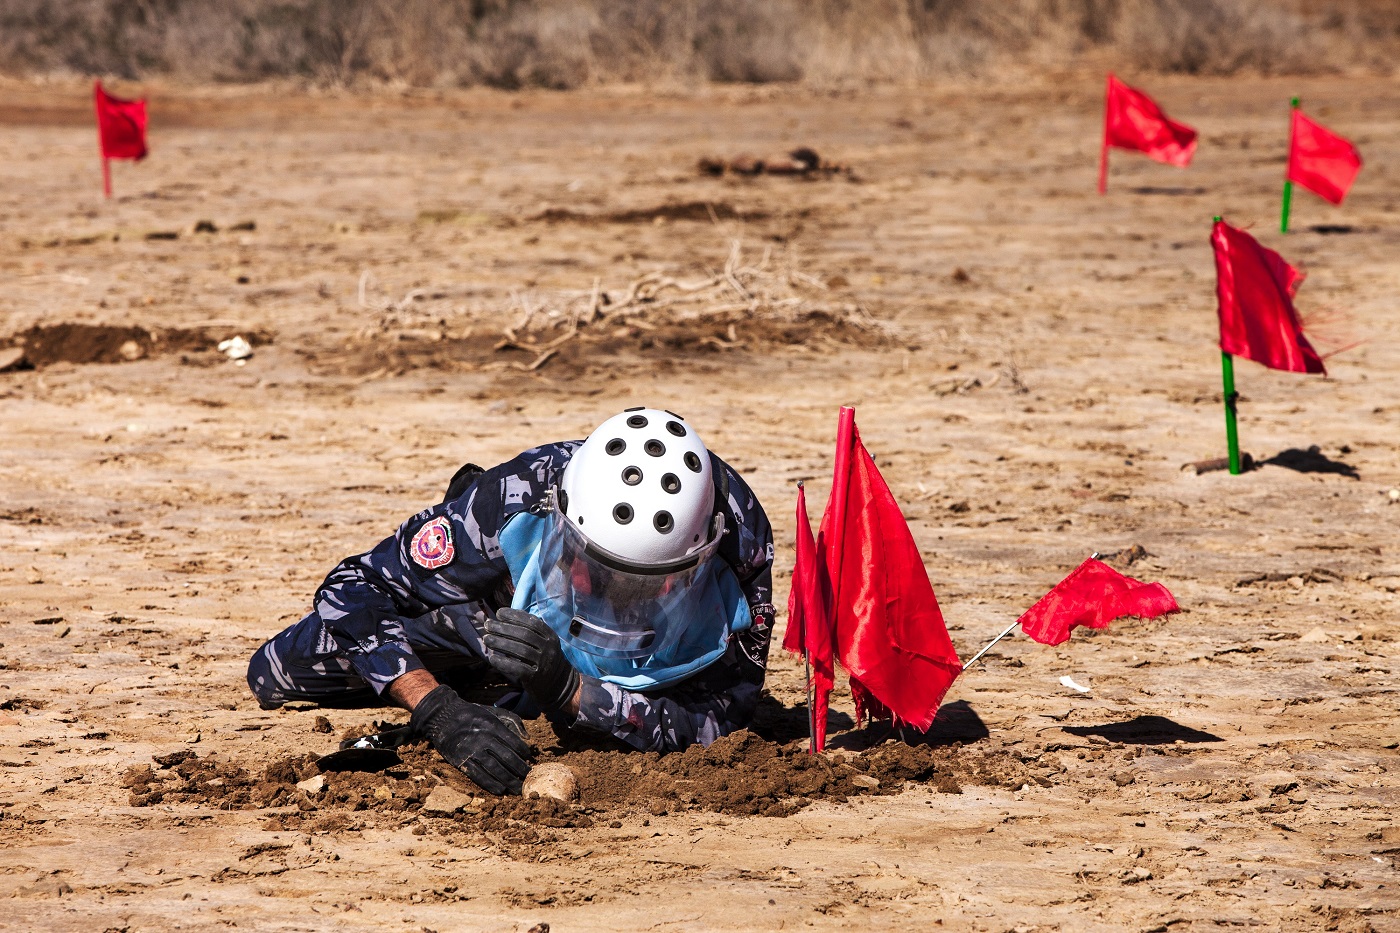 An Iraqi Civil Defense officer practices the clearing procedures of an area contaminated by anti-personnel landmines and explosive remnants of war.